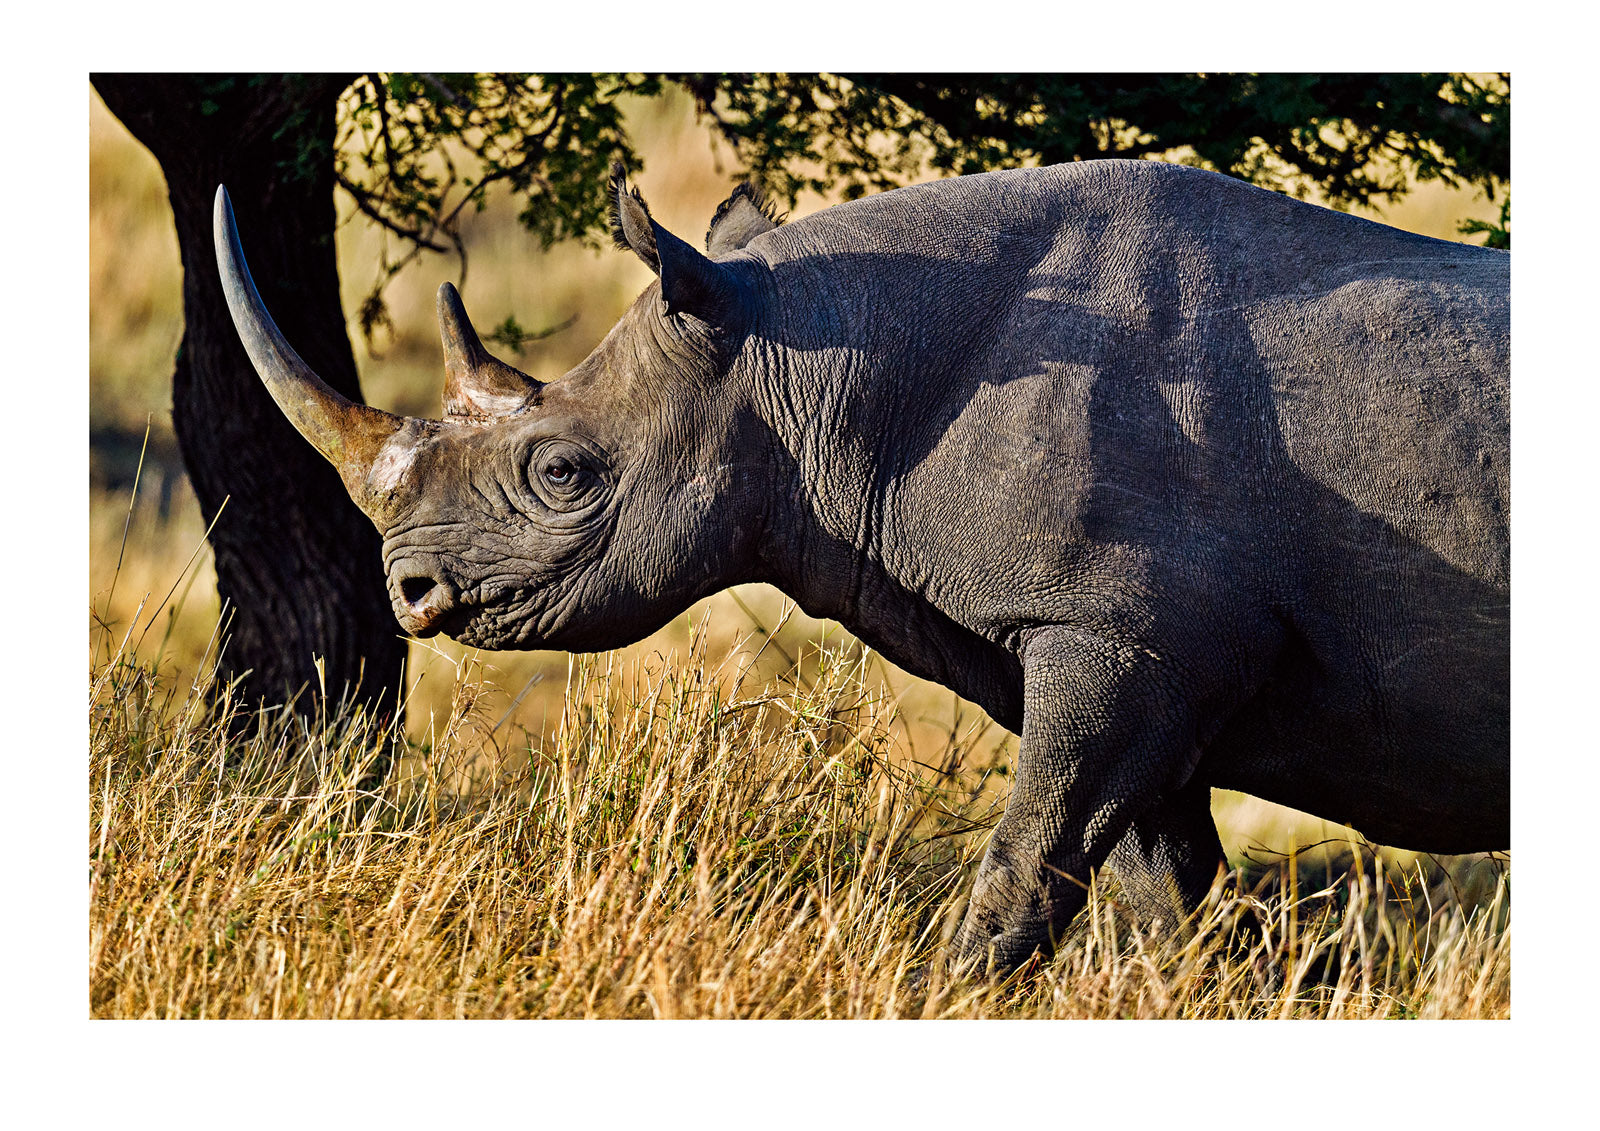 A critically endangered Black Rhinoceros. There’s a misconception that poaching of rhino is a recent phenomenon. Although numbers increased exponentially in the last century, poaching has been occurring since 1200 BC. The horns were once shaped as wine cups, and the thick skin to manufacture armour for soldiers, belts and even crowns in China. In the Middle East the horns were carved to make the handles of ceremonial daggers known as Jambiyas.  Serengeti National Park, Tanzania.